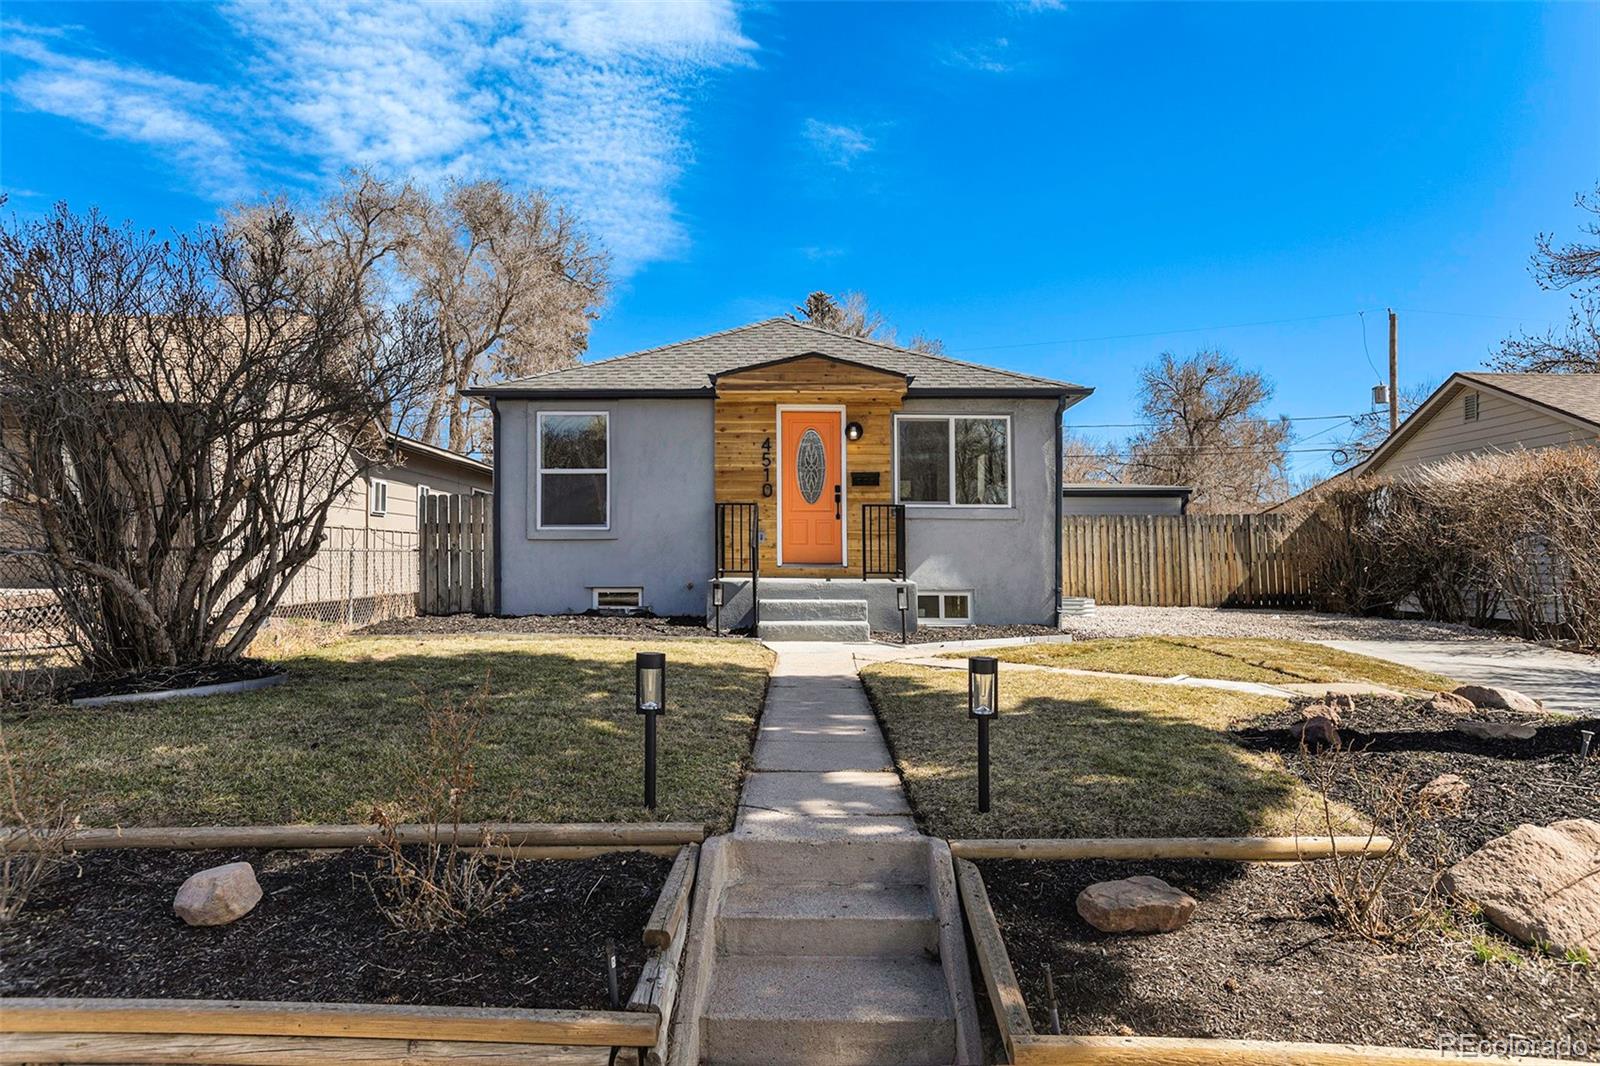 Report Image for 4510 S Grant Street,Englewood, Colorado